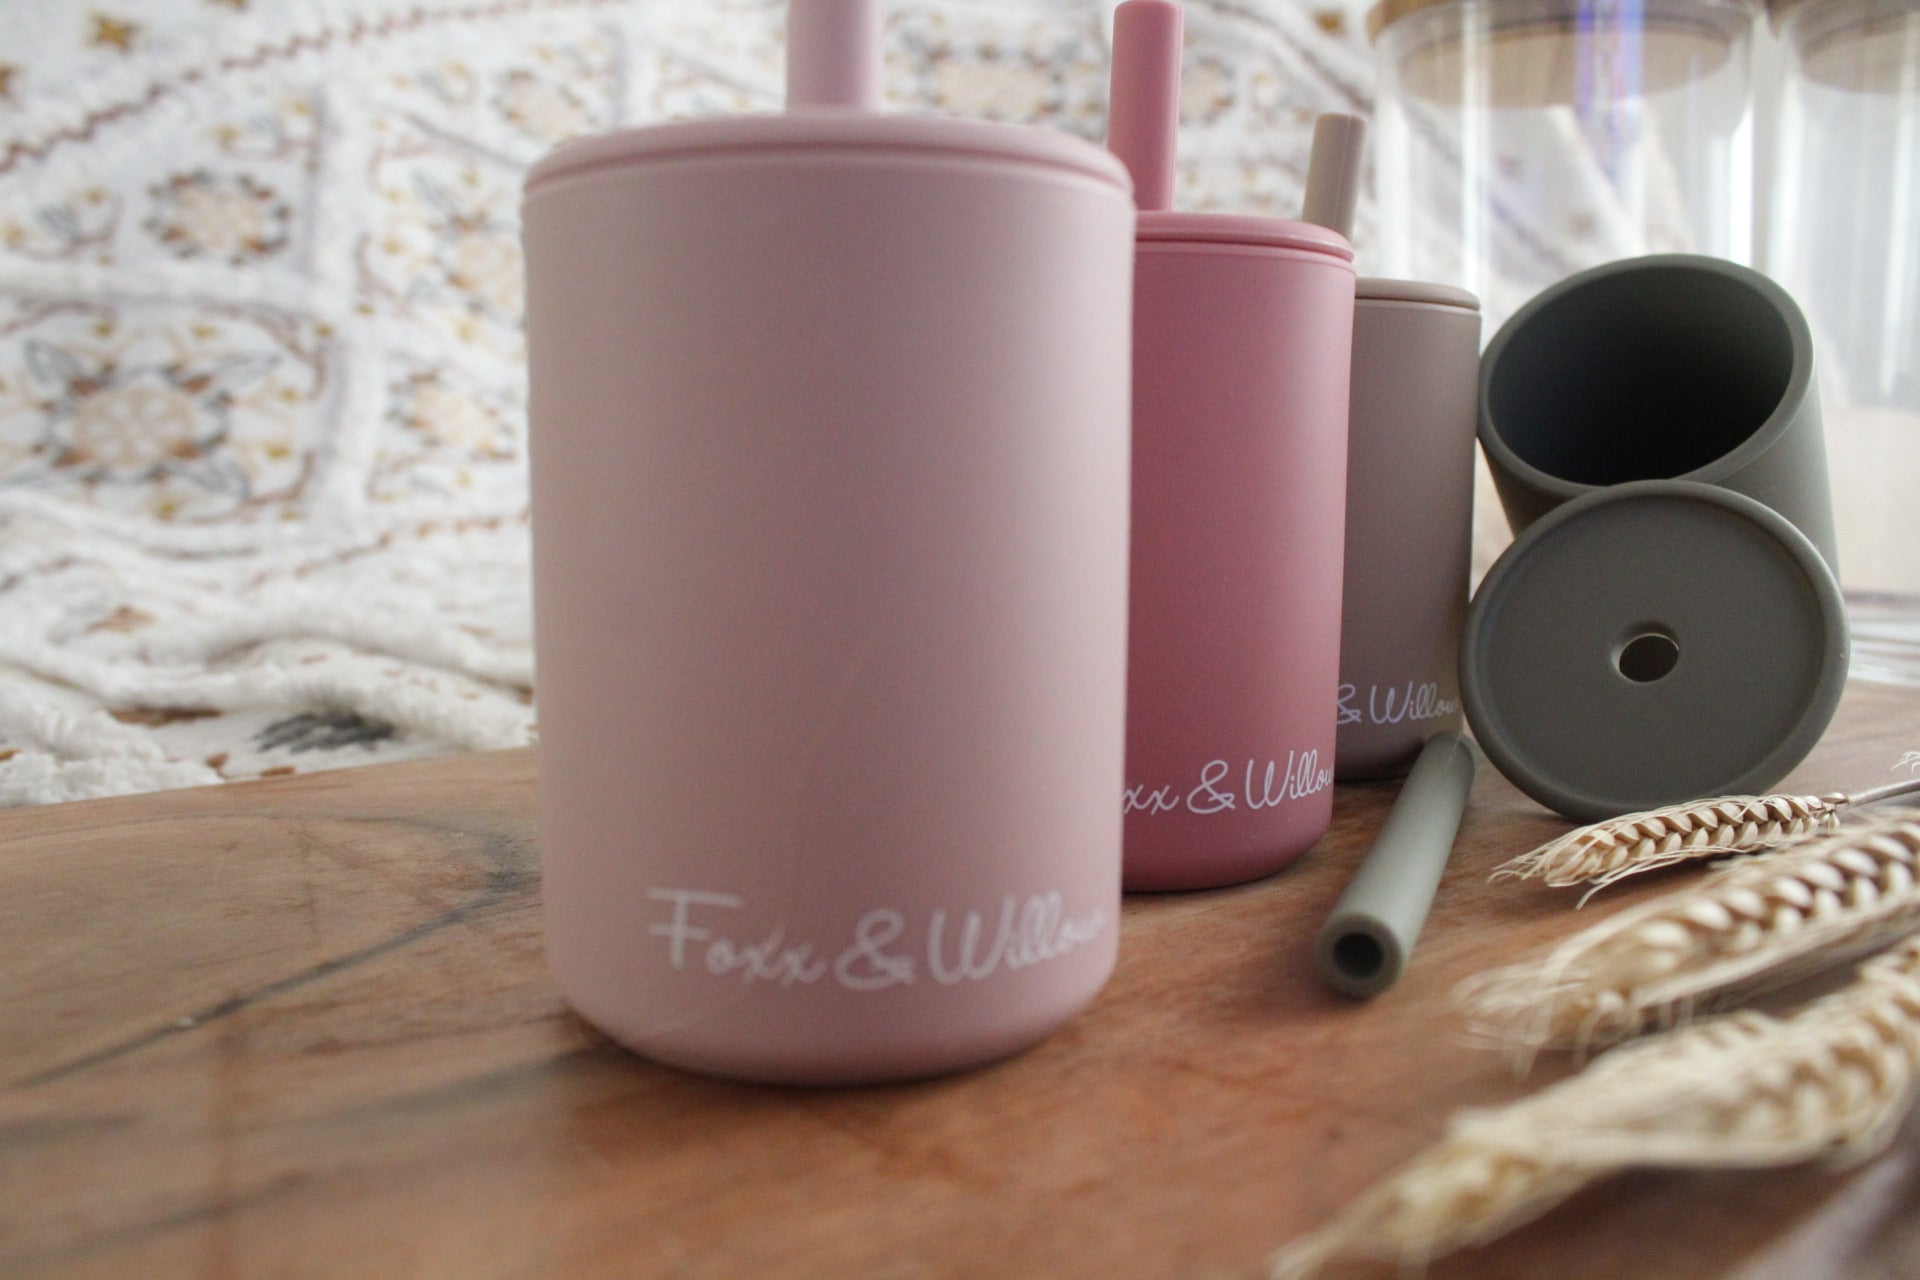 Your Big Cup + Straw – Foxx & Willow